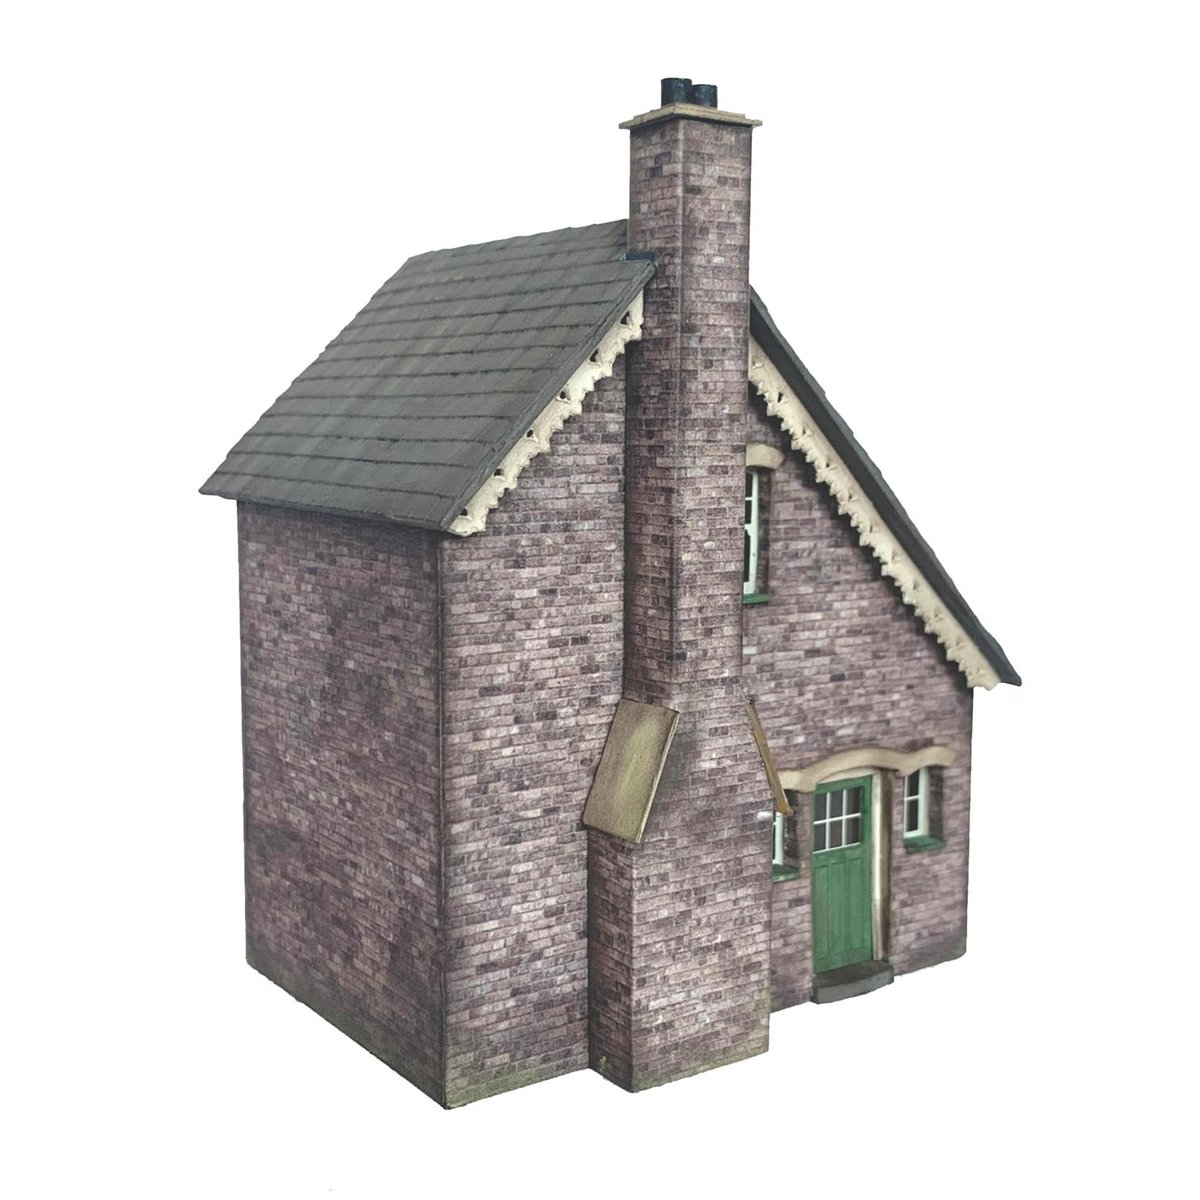 🚨New 4mm kit released!🚨
Crossing Cottage is the latest 1:76 model building kit added to our 360  ͦ range & can be purchased via our online shop – petitepropertiesltd.com 

#petiteproperties #petitepropertieskits #oogauge #modelrailway #modelrailwaybuildings #railwaymodelling